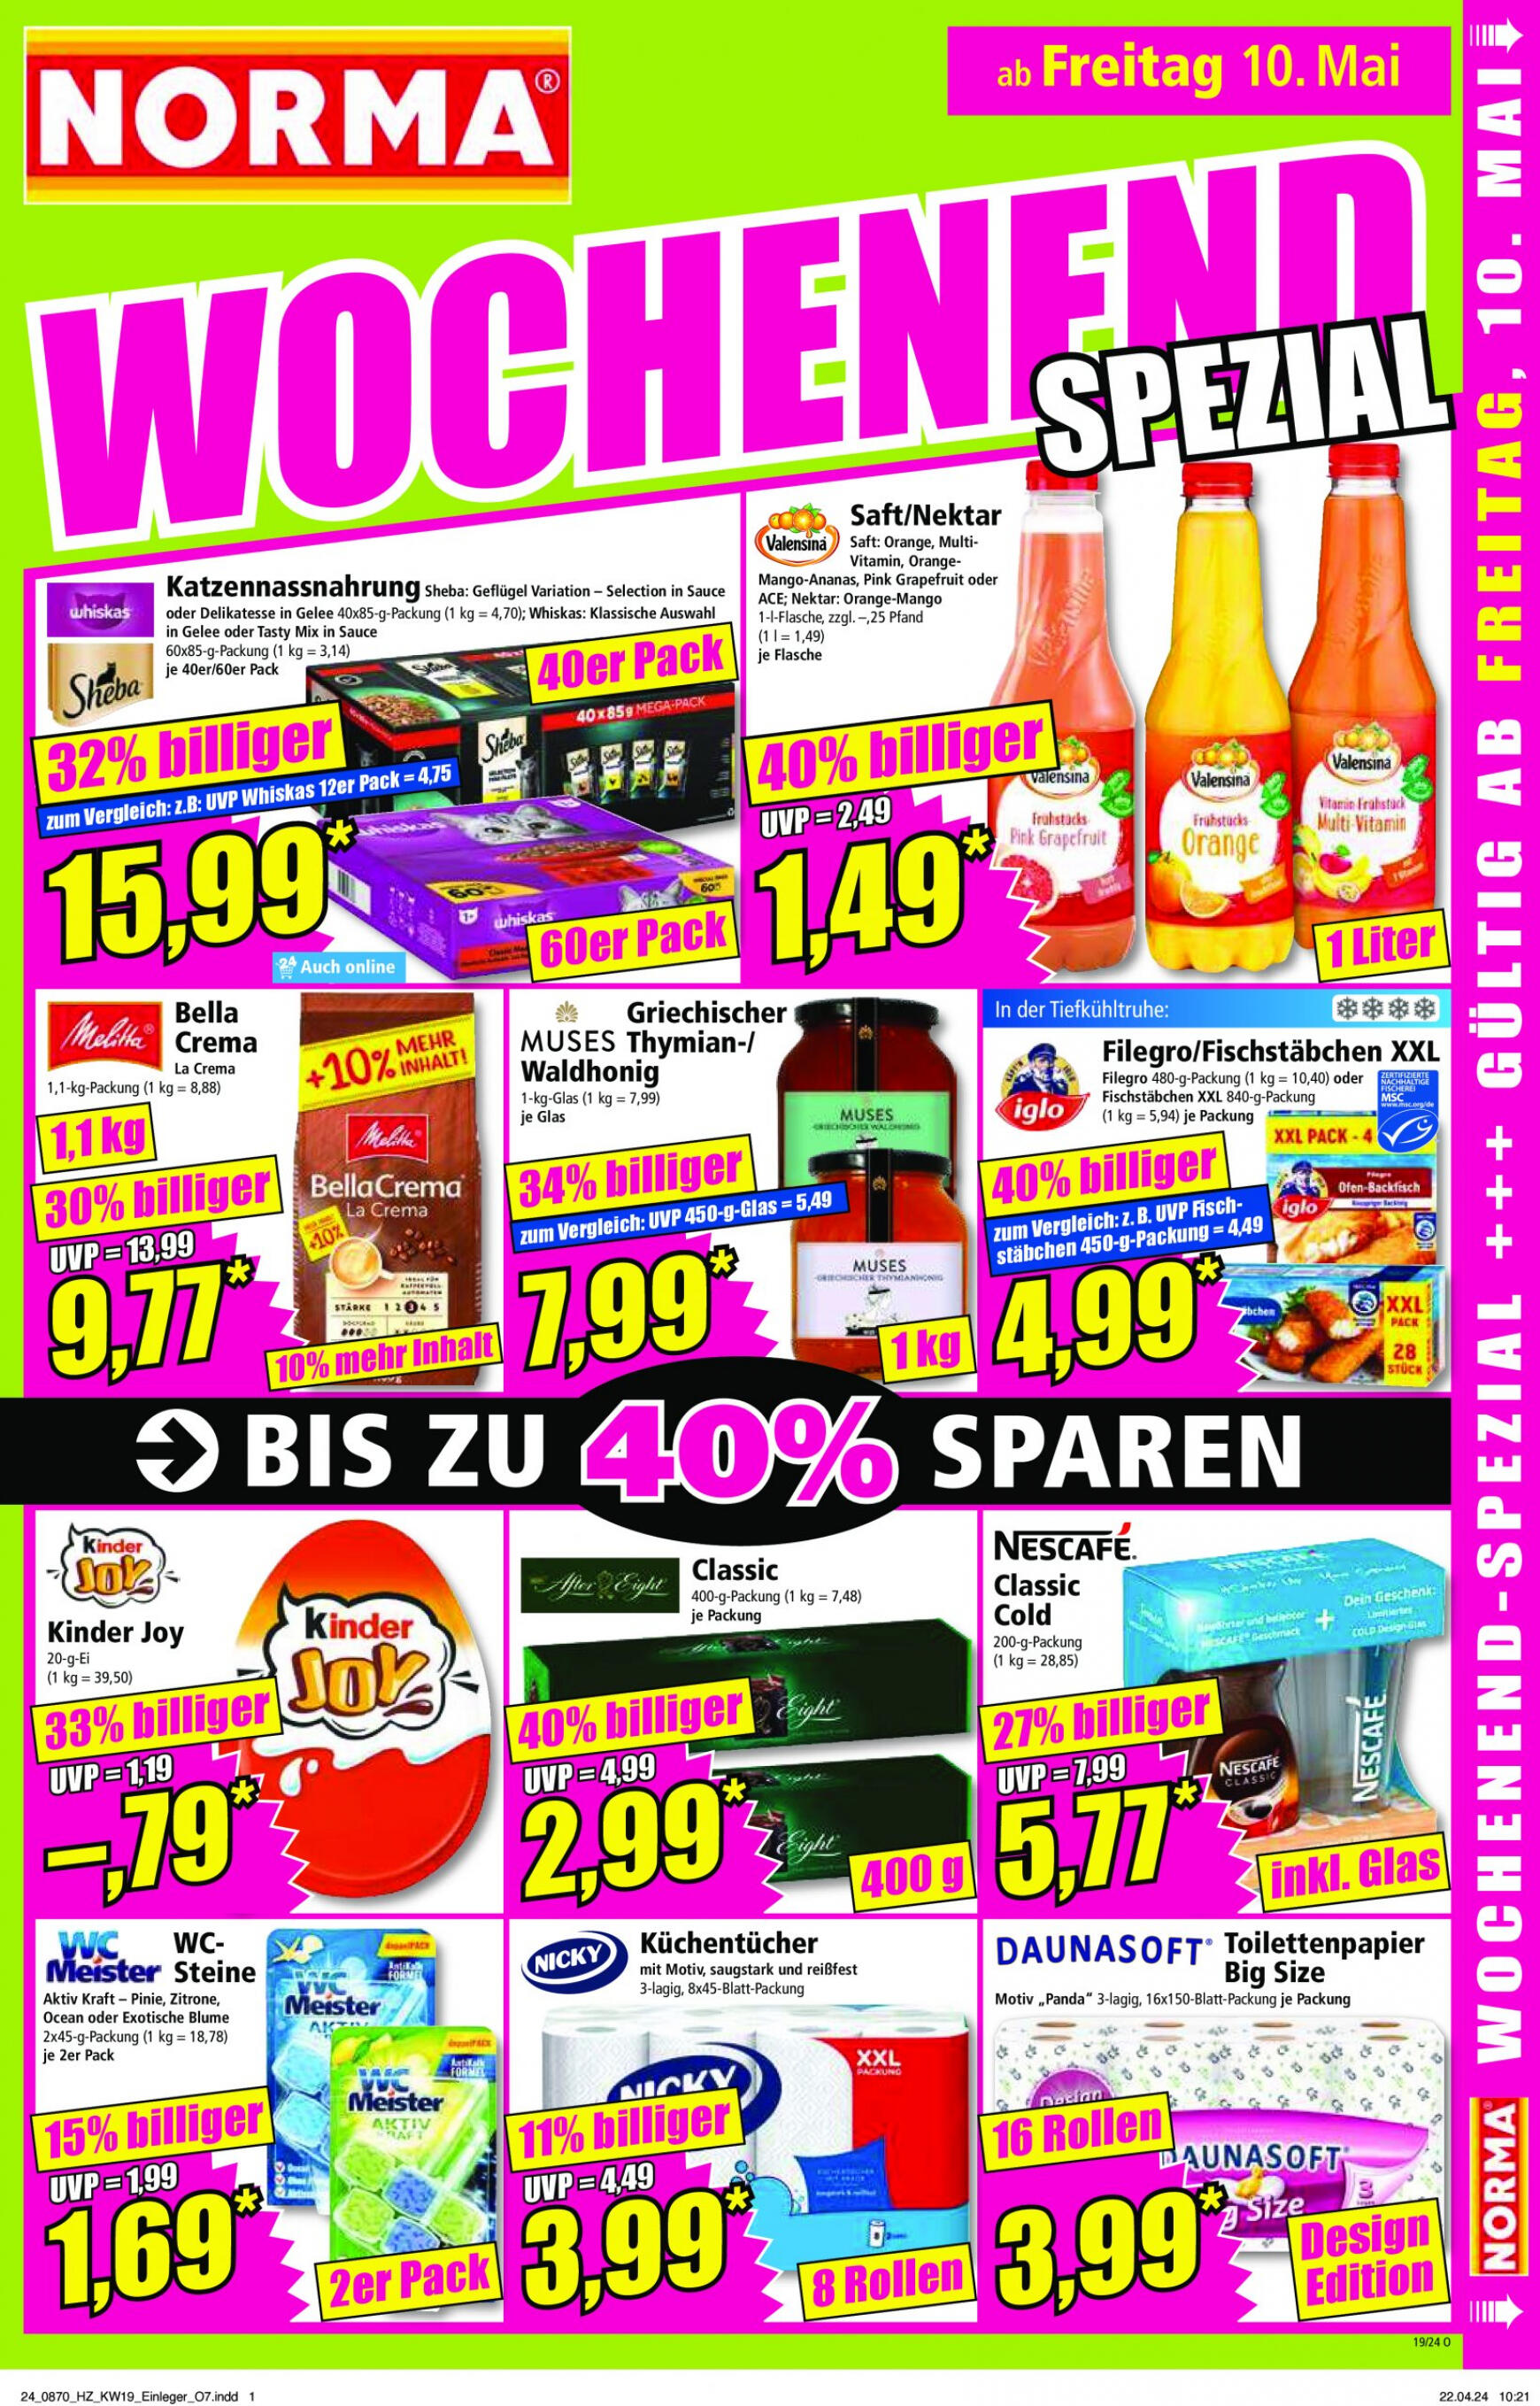 norma - Flyer Norma aktuell 06.05. - 11.05. - page: 15